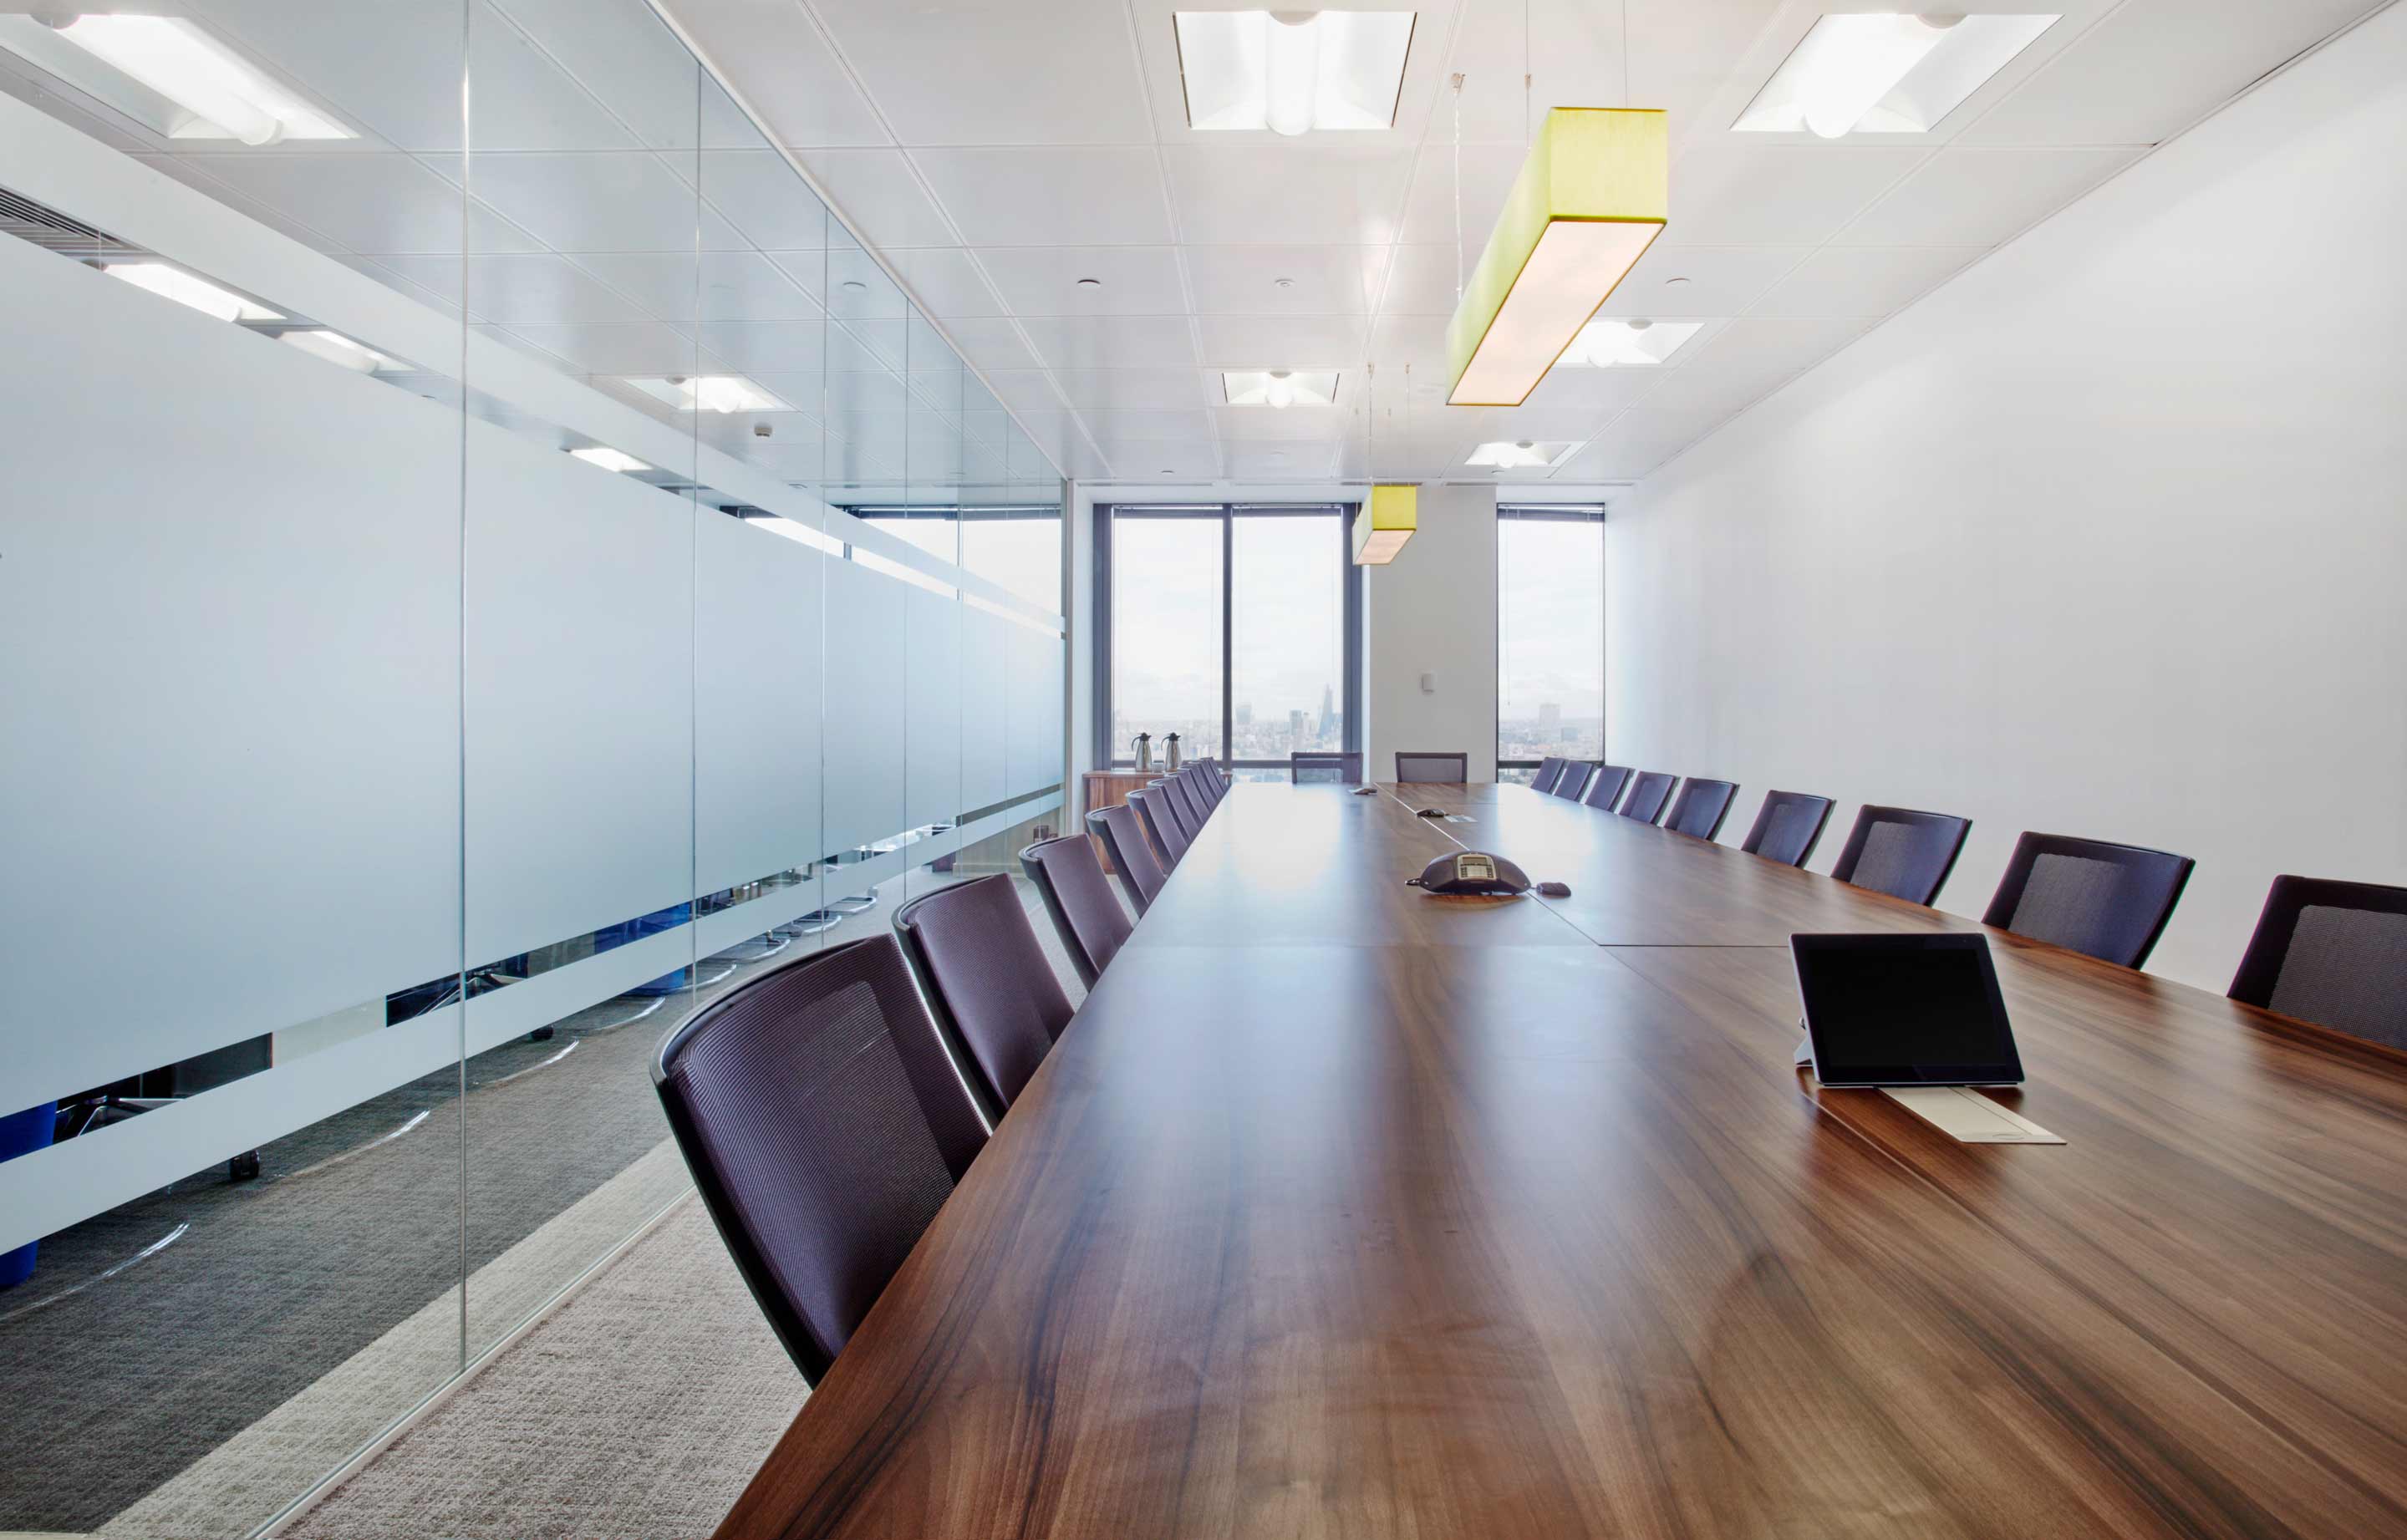 A long dark wooden boardroom table to the left of a glass wall